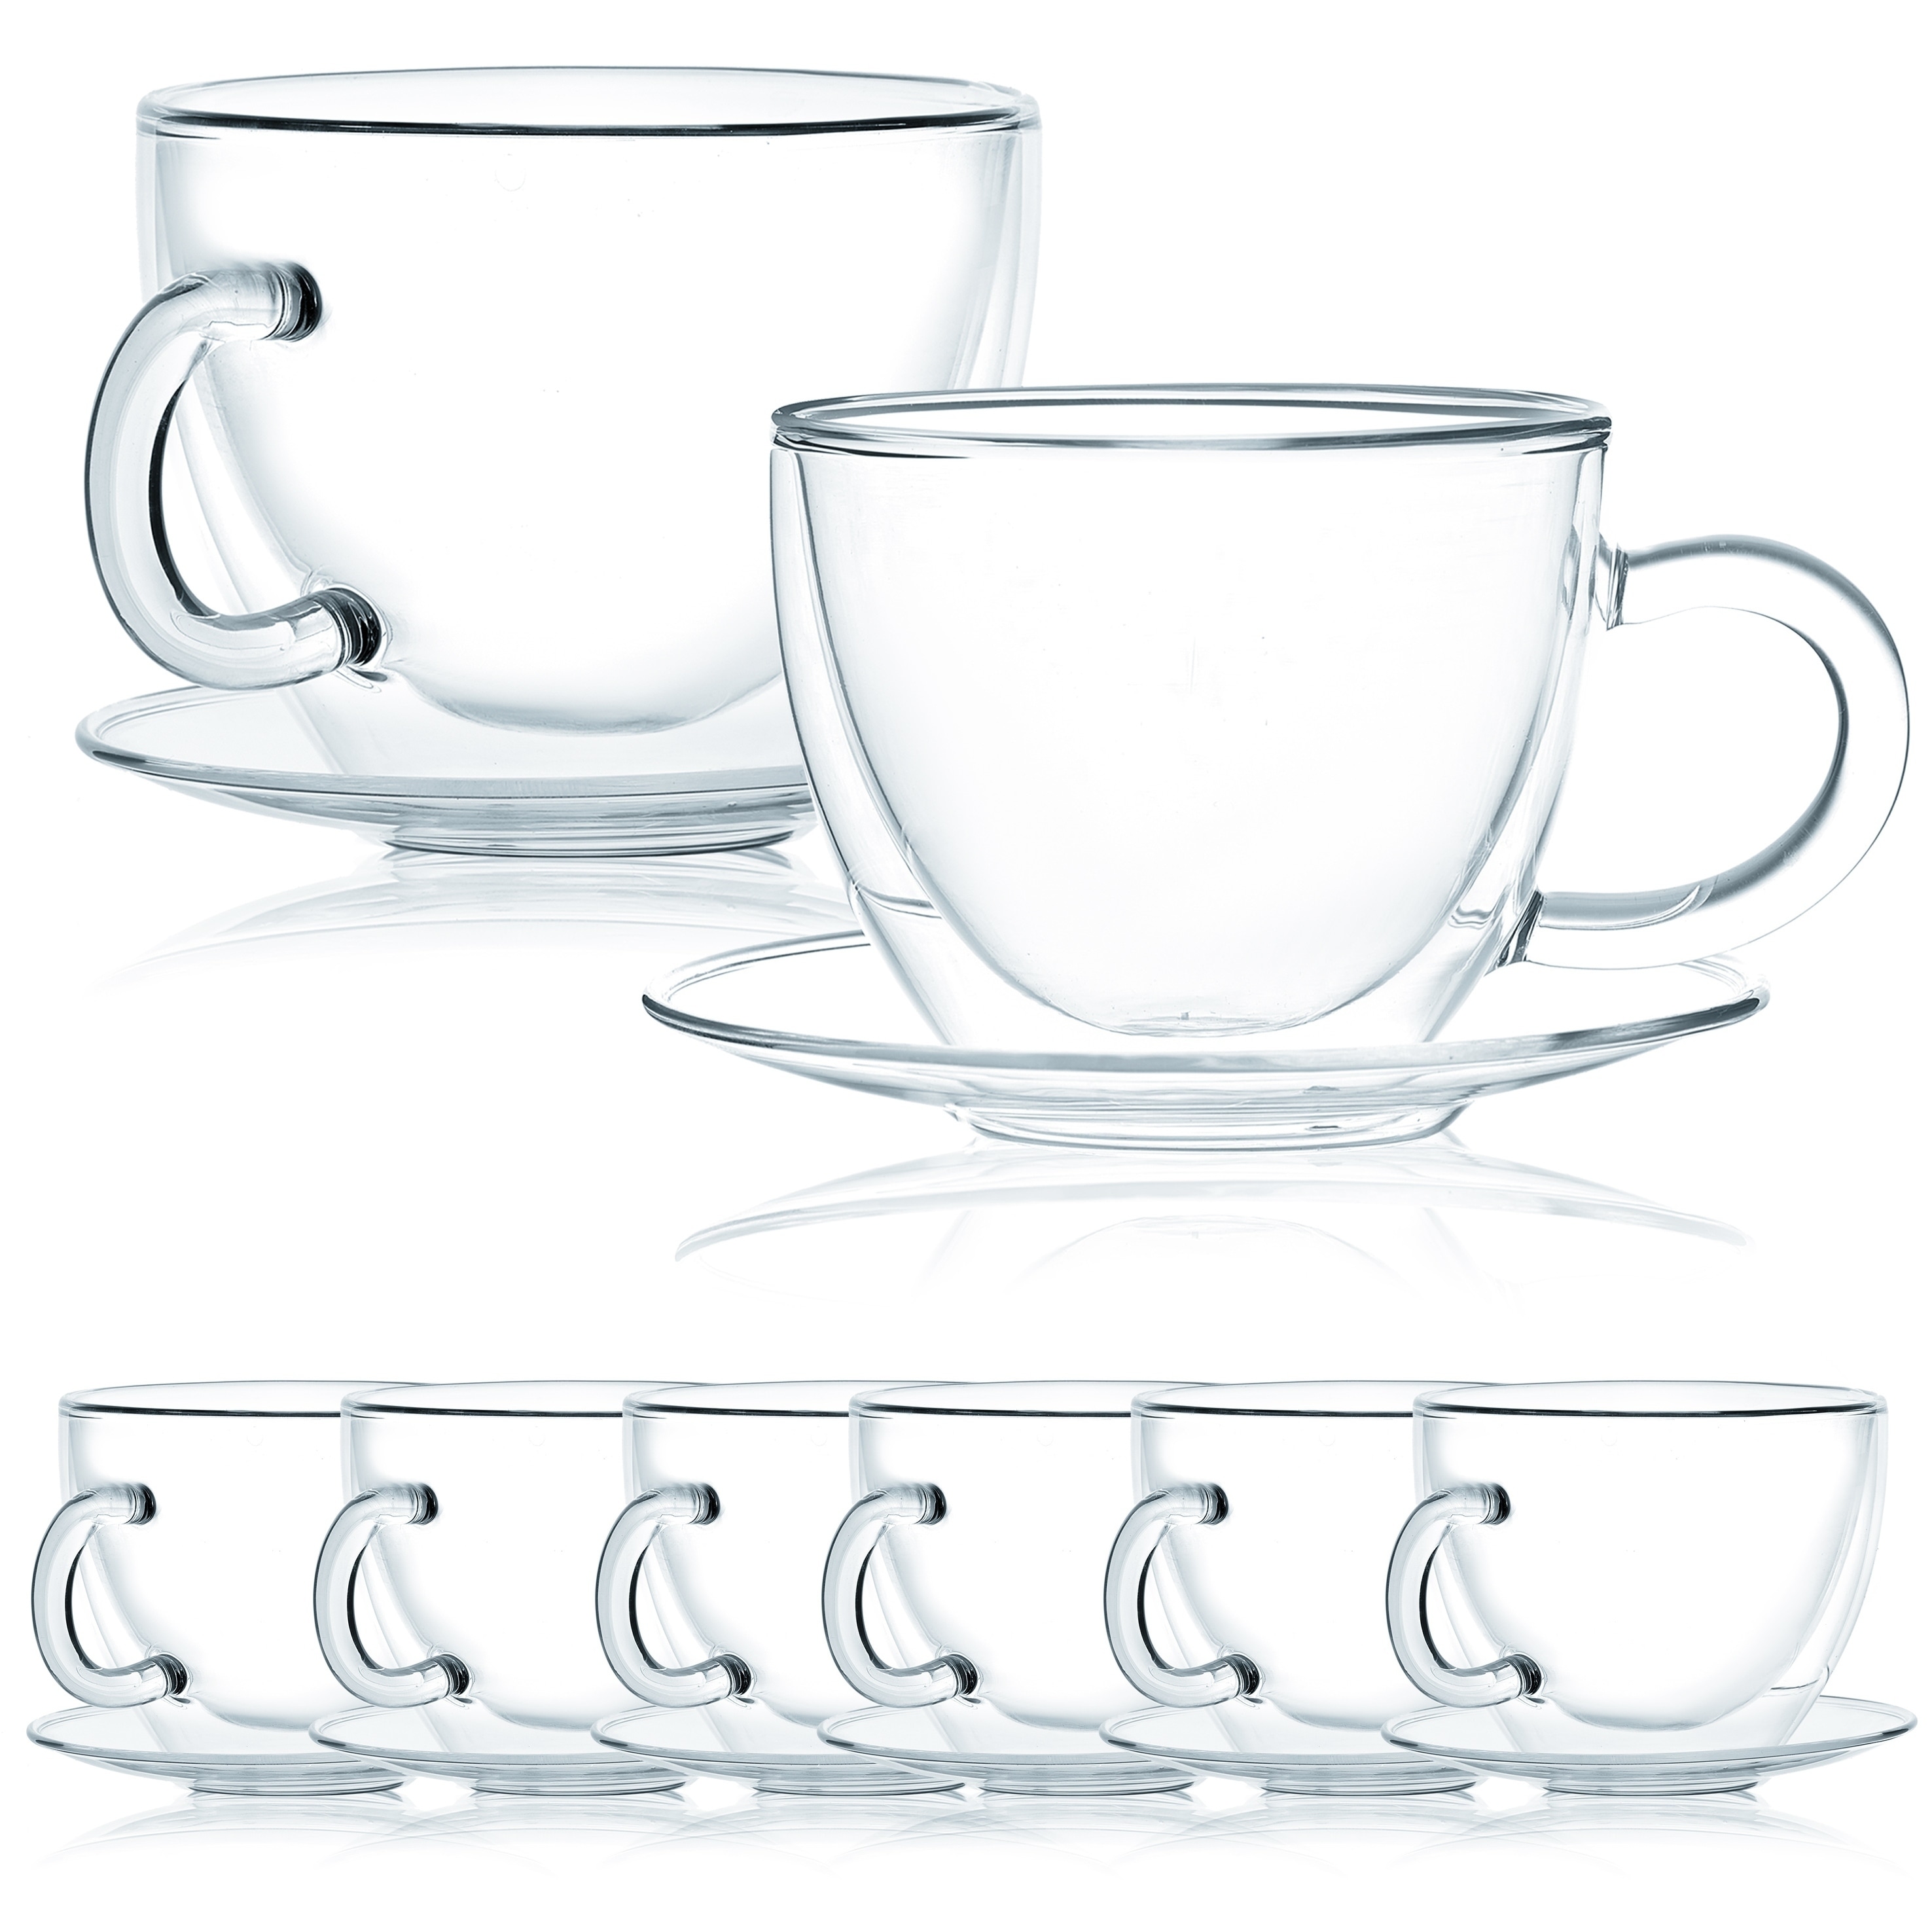 JavaFly Double Wall Glass Cup With Saucer, Set of 4, Flowering Tea